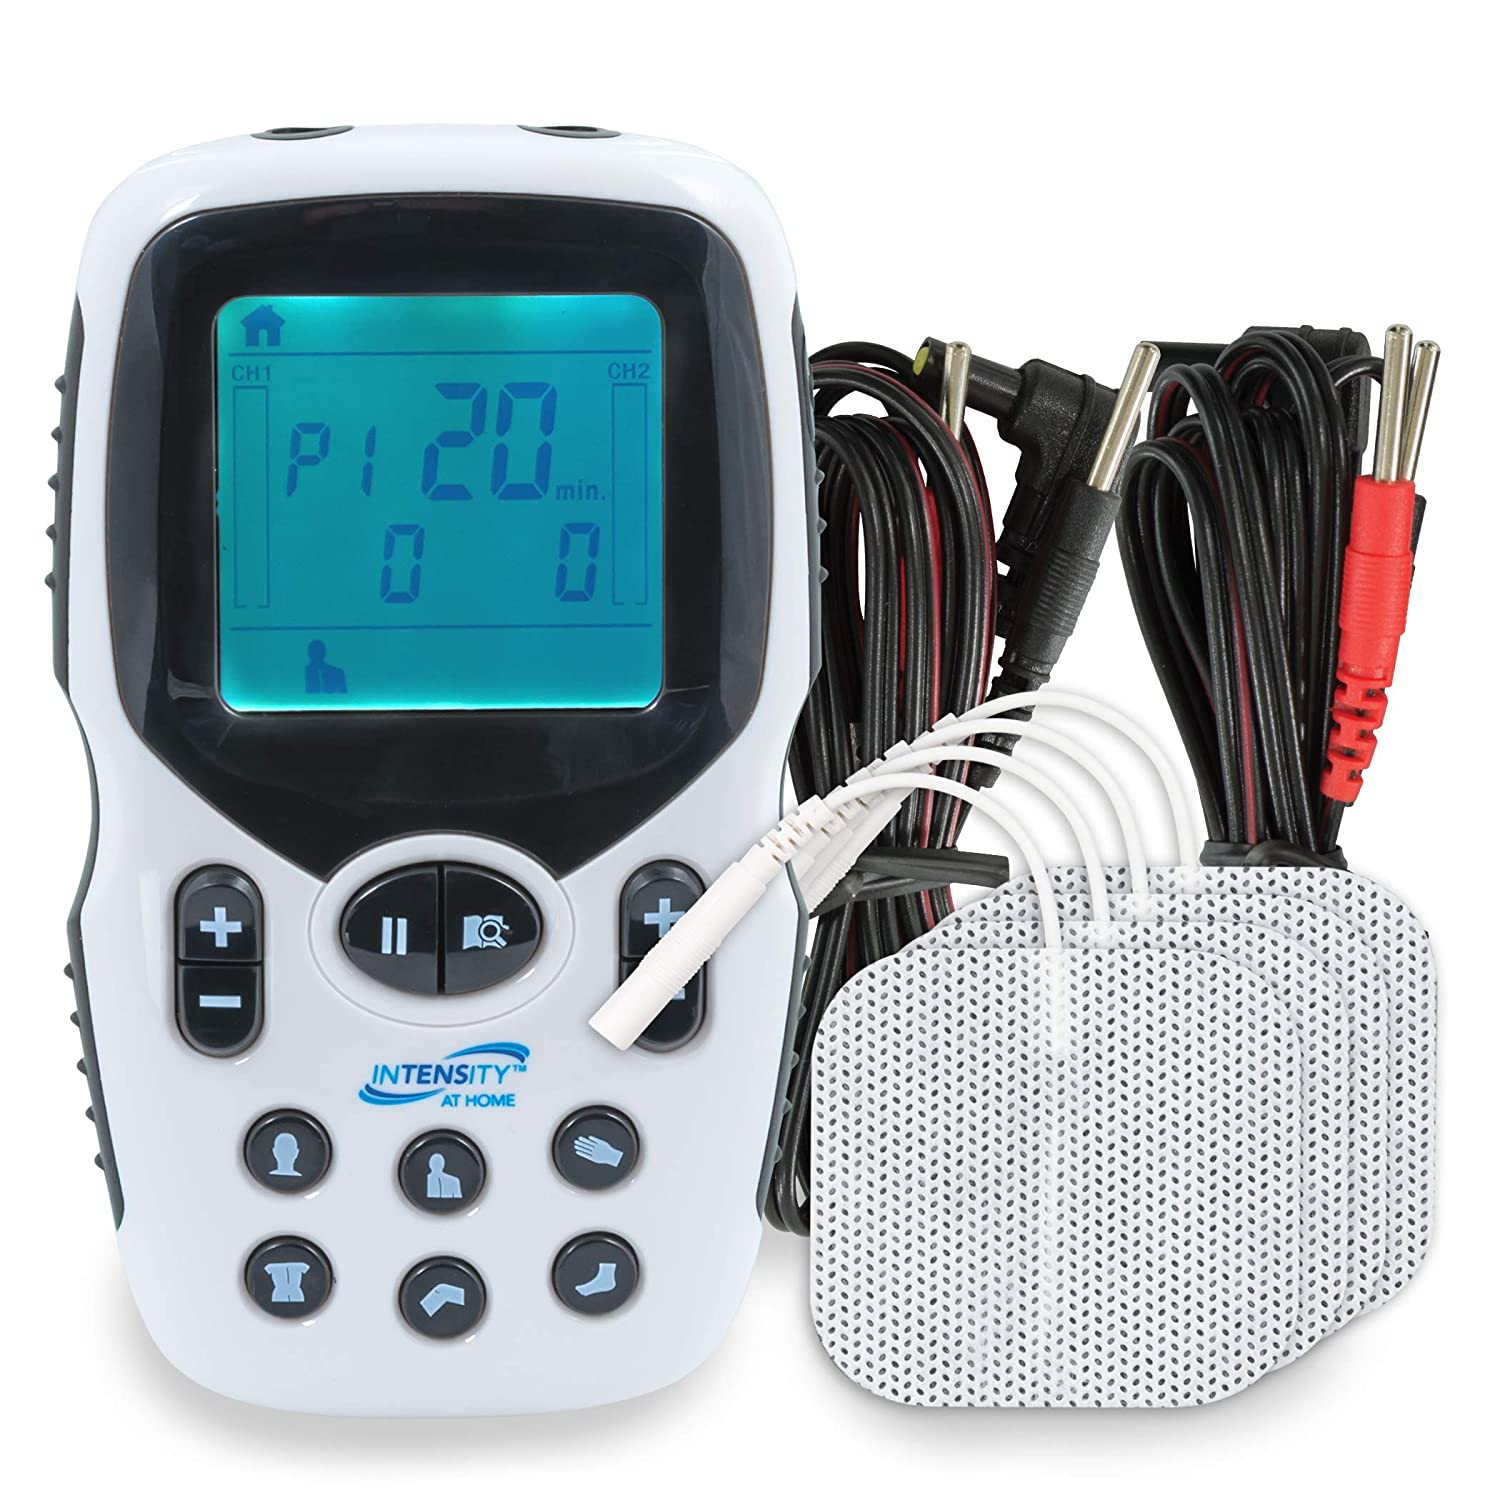 TENS 7000 Digital TENS Unit with Accessories - TENS Unit Muscle